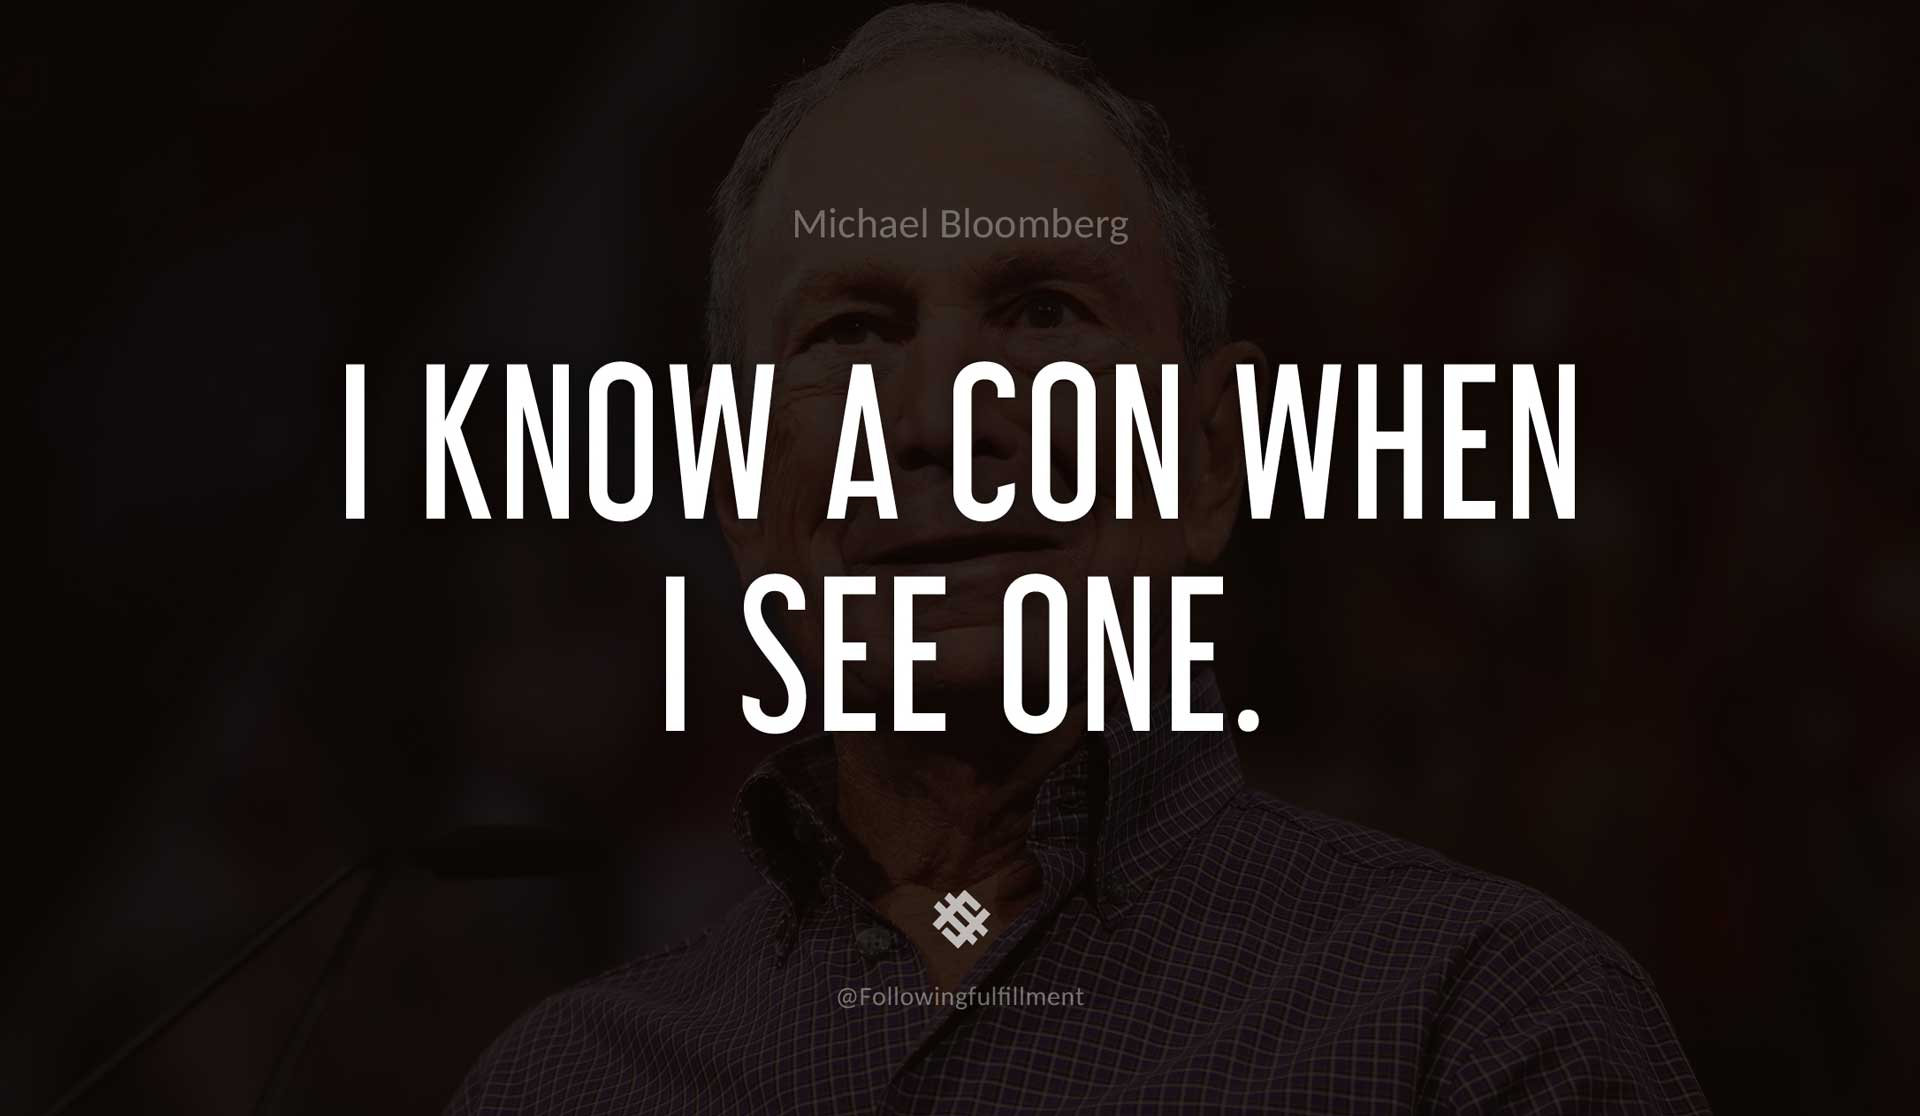 I-know-a-con-when-I-see-one.-MICHAEL-BLOOMBERG-Quote.jpg